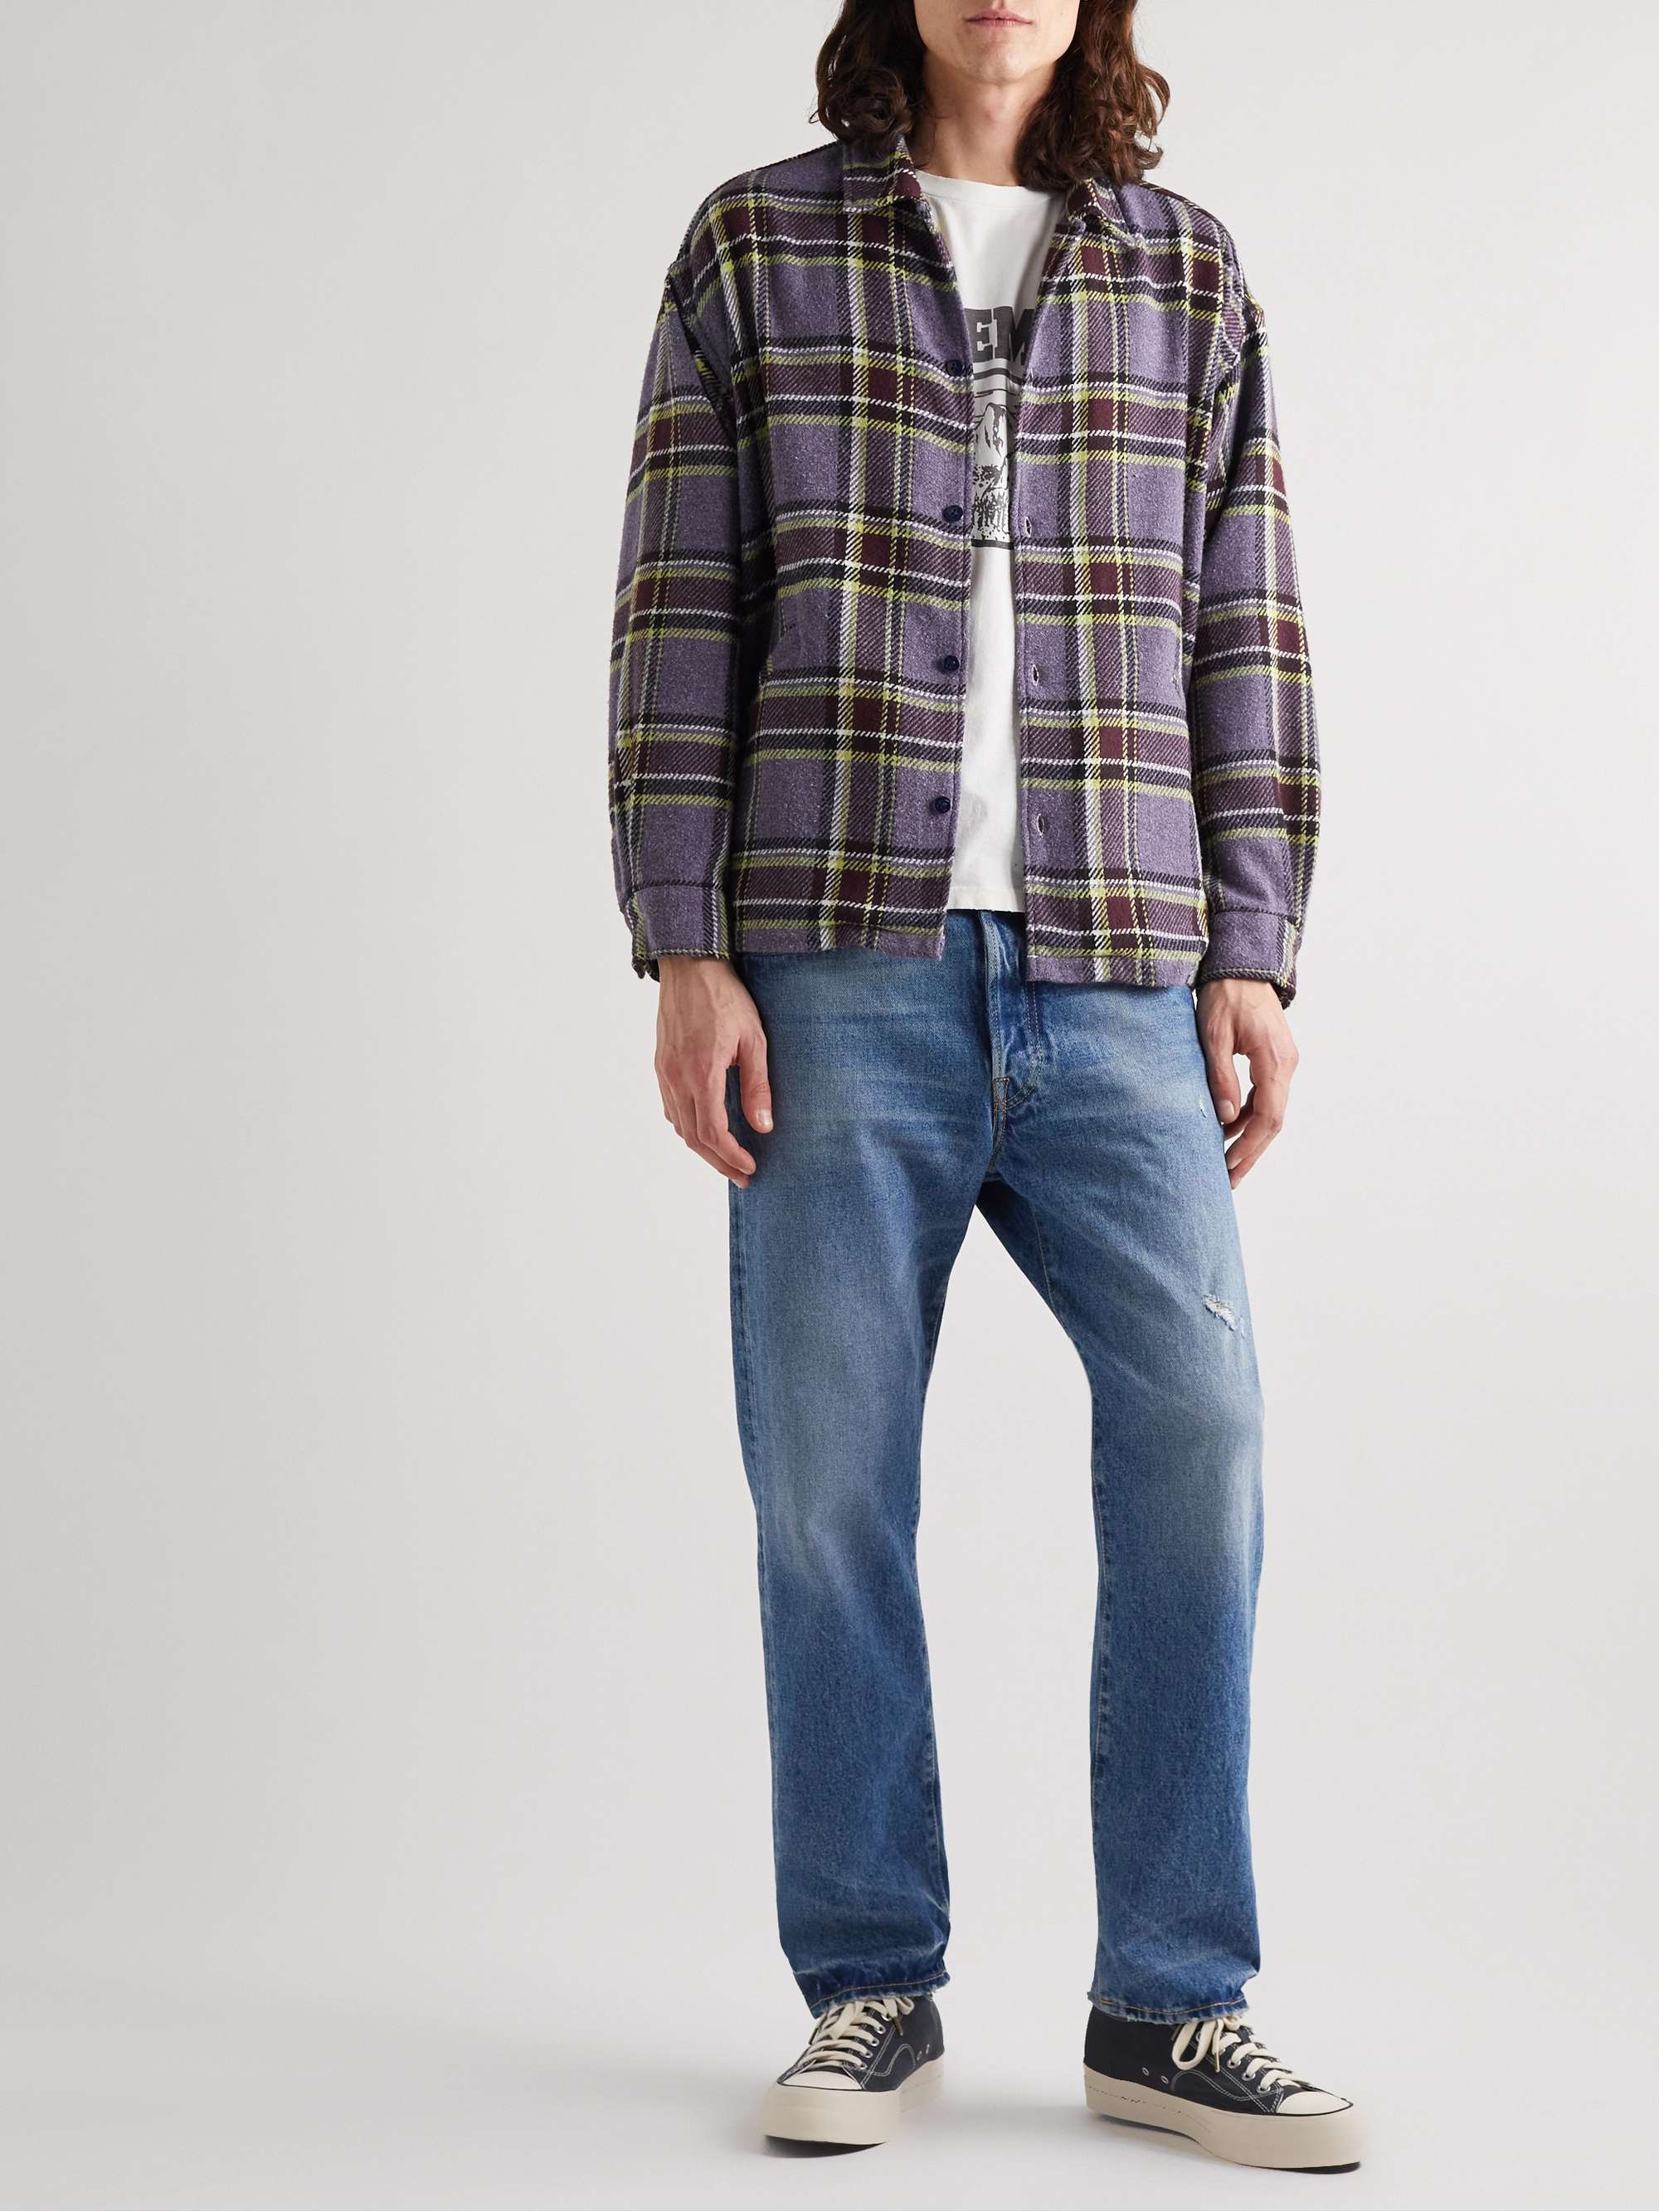 REMI RELIEF Checked Cotton-Blend Flannel Shirt